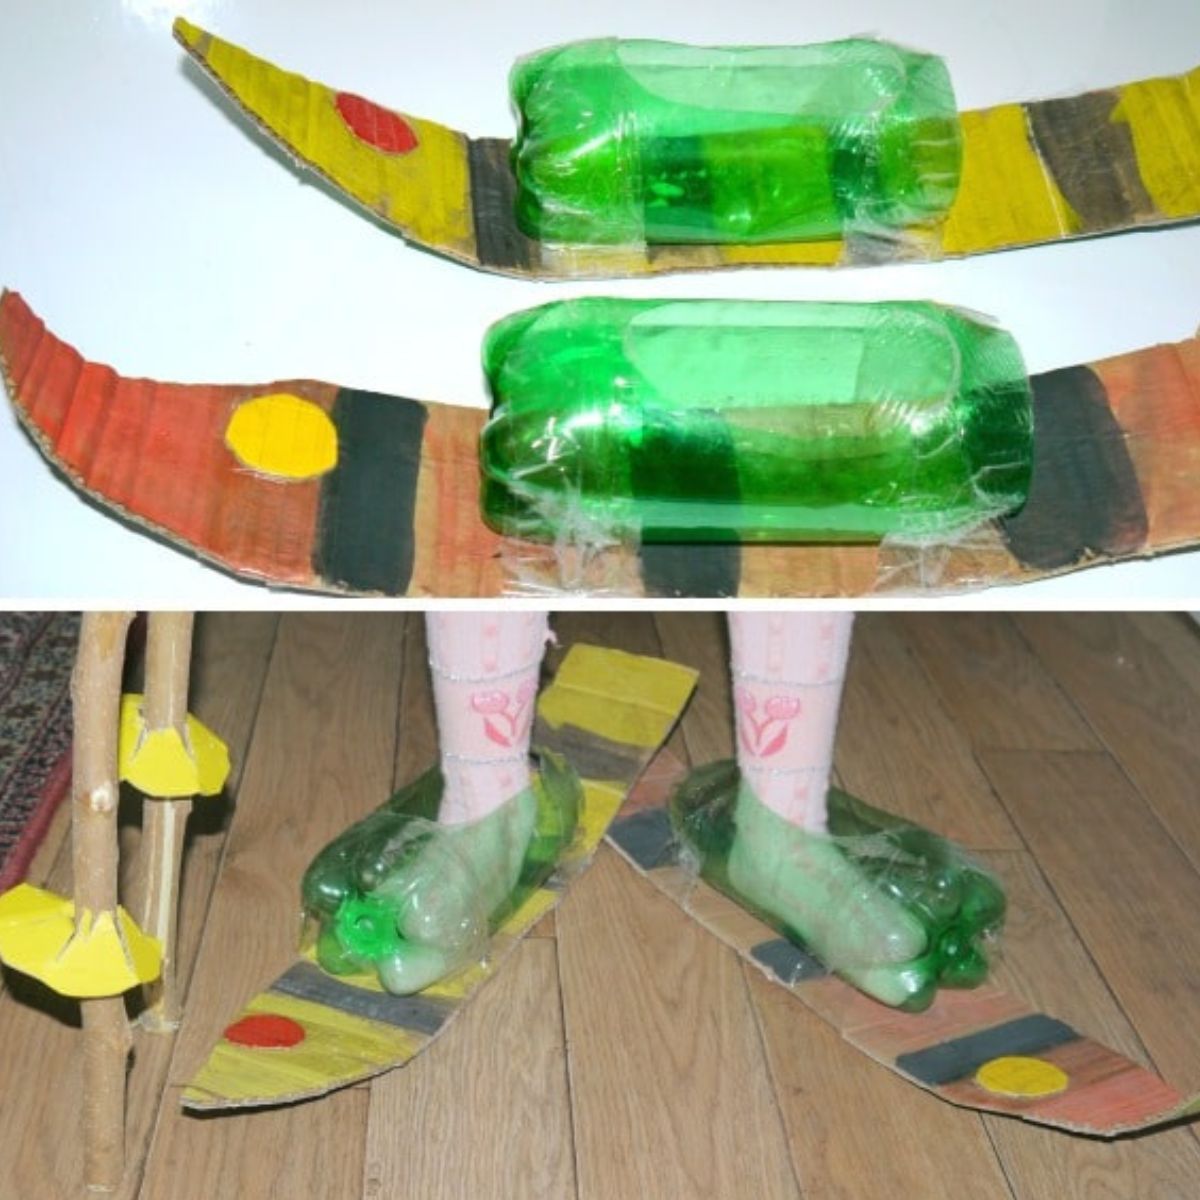 5 images of homemade skis from cardboard, plastic and wooden sticks.